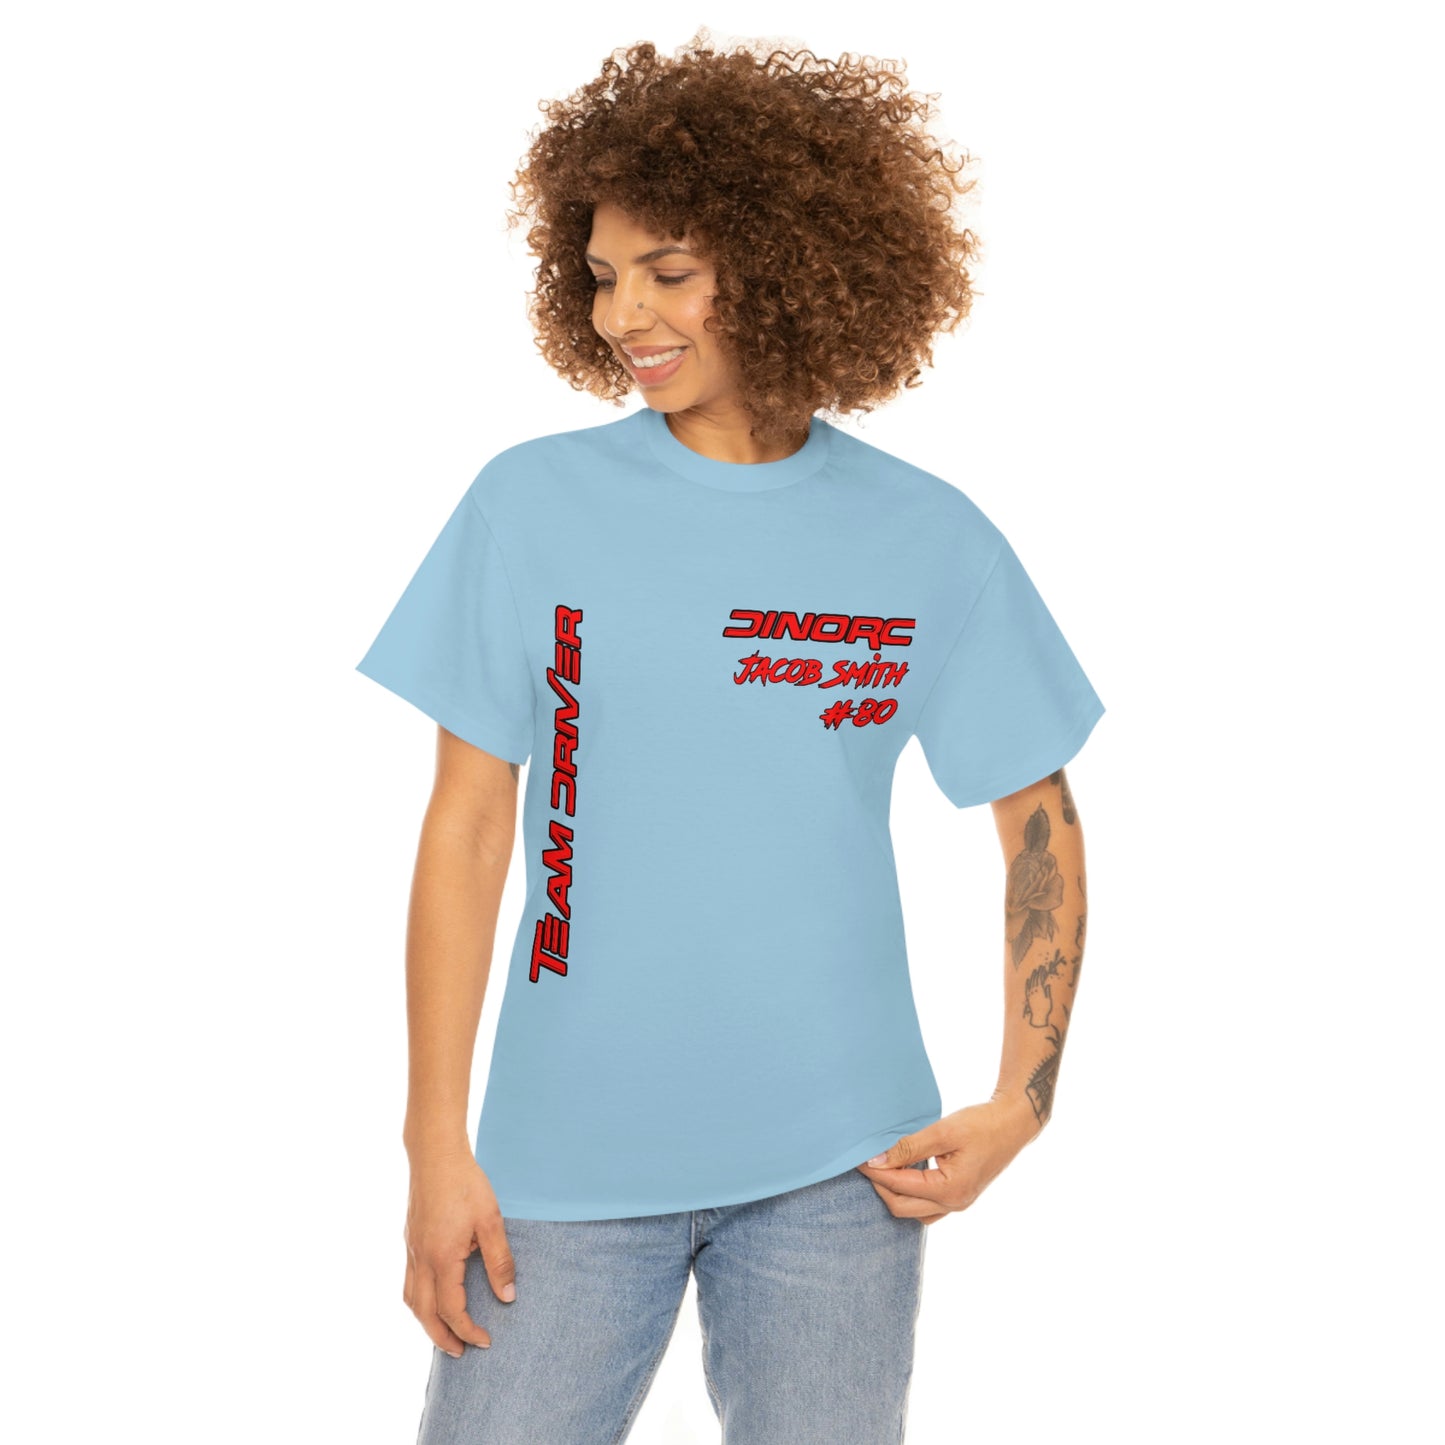 Vertical Team Driver Jacob Smith truck logo Front and Back DinoRc Logo T-Shirt S-5x 5 colors